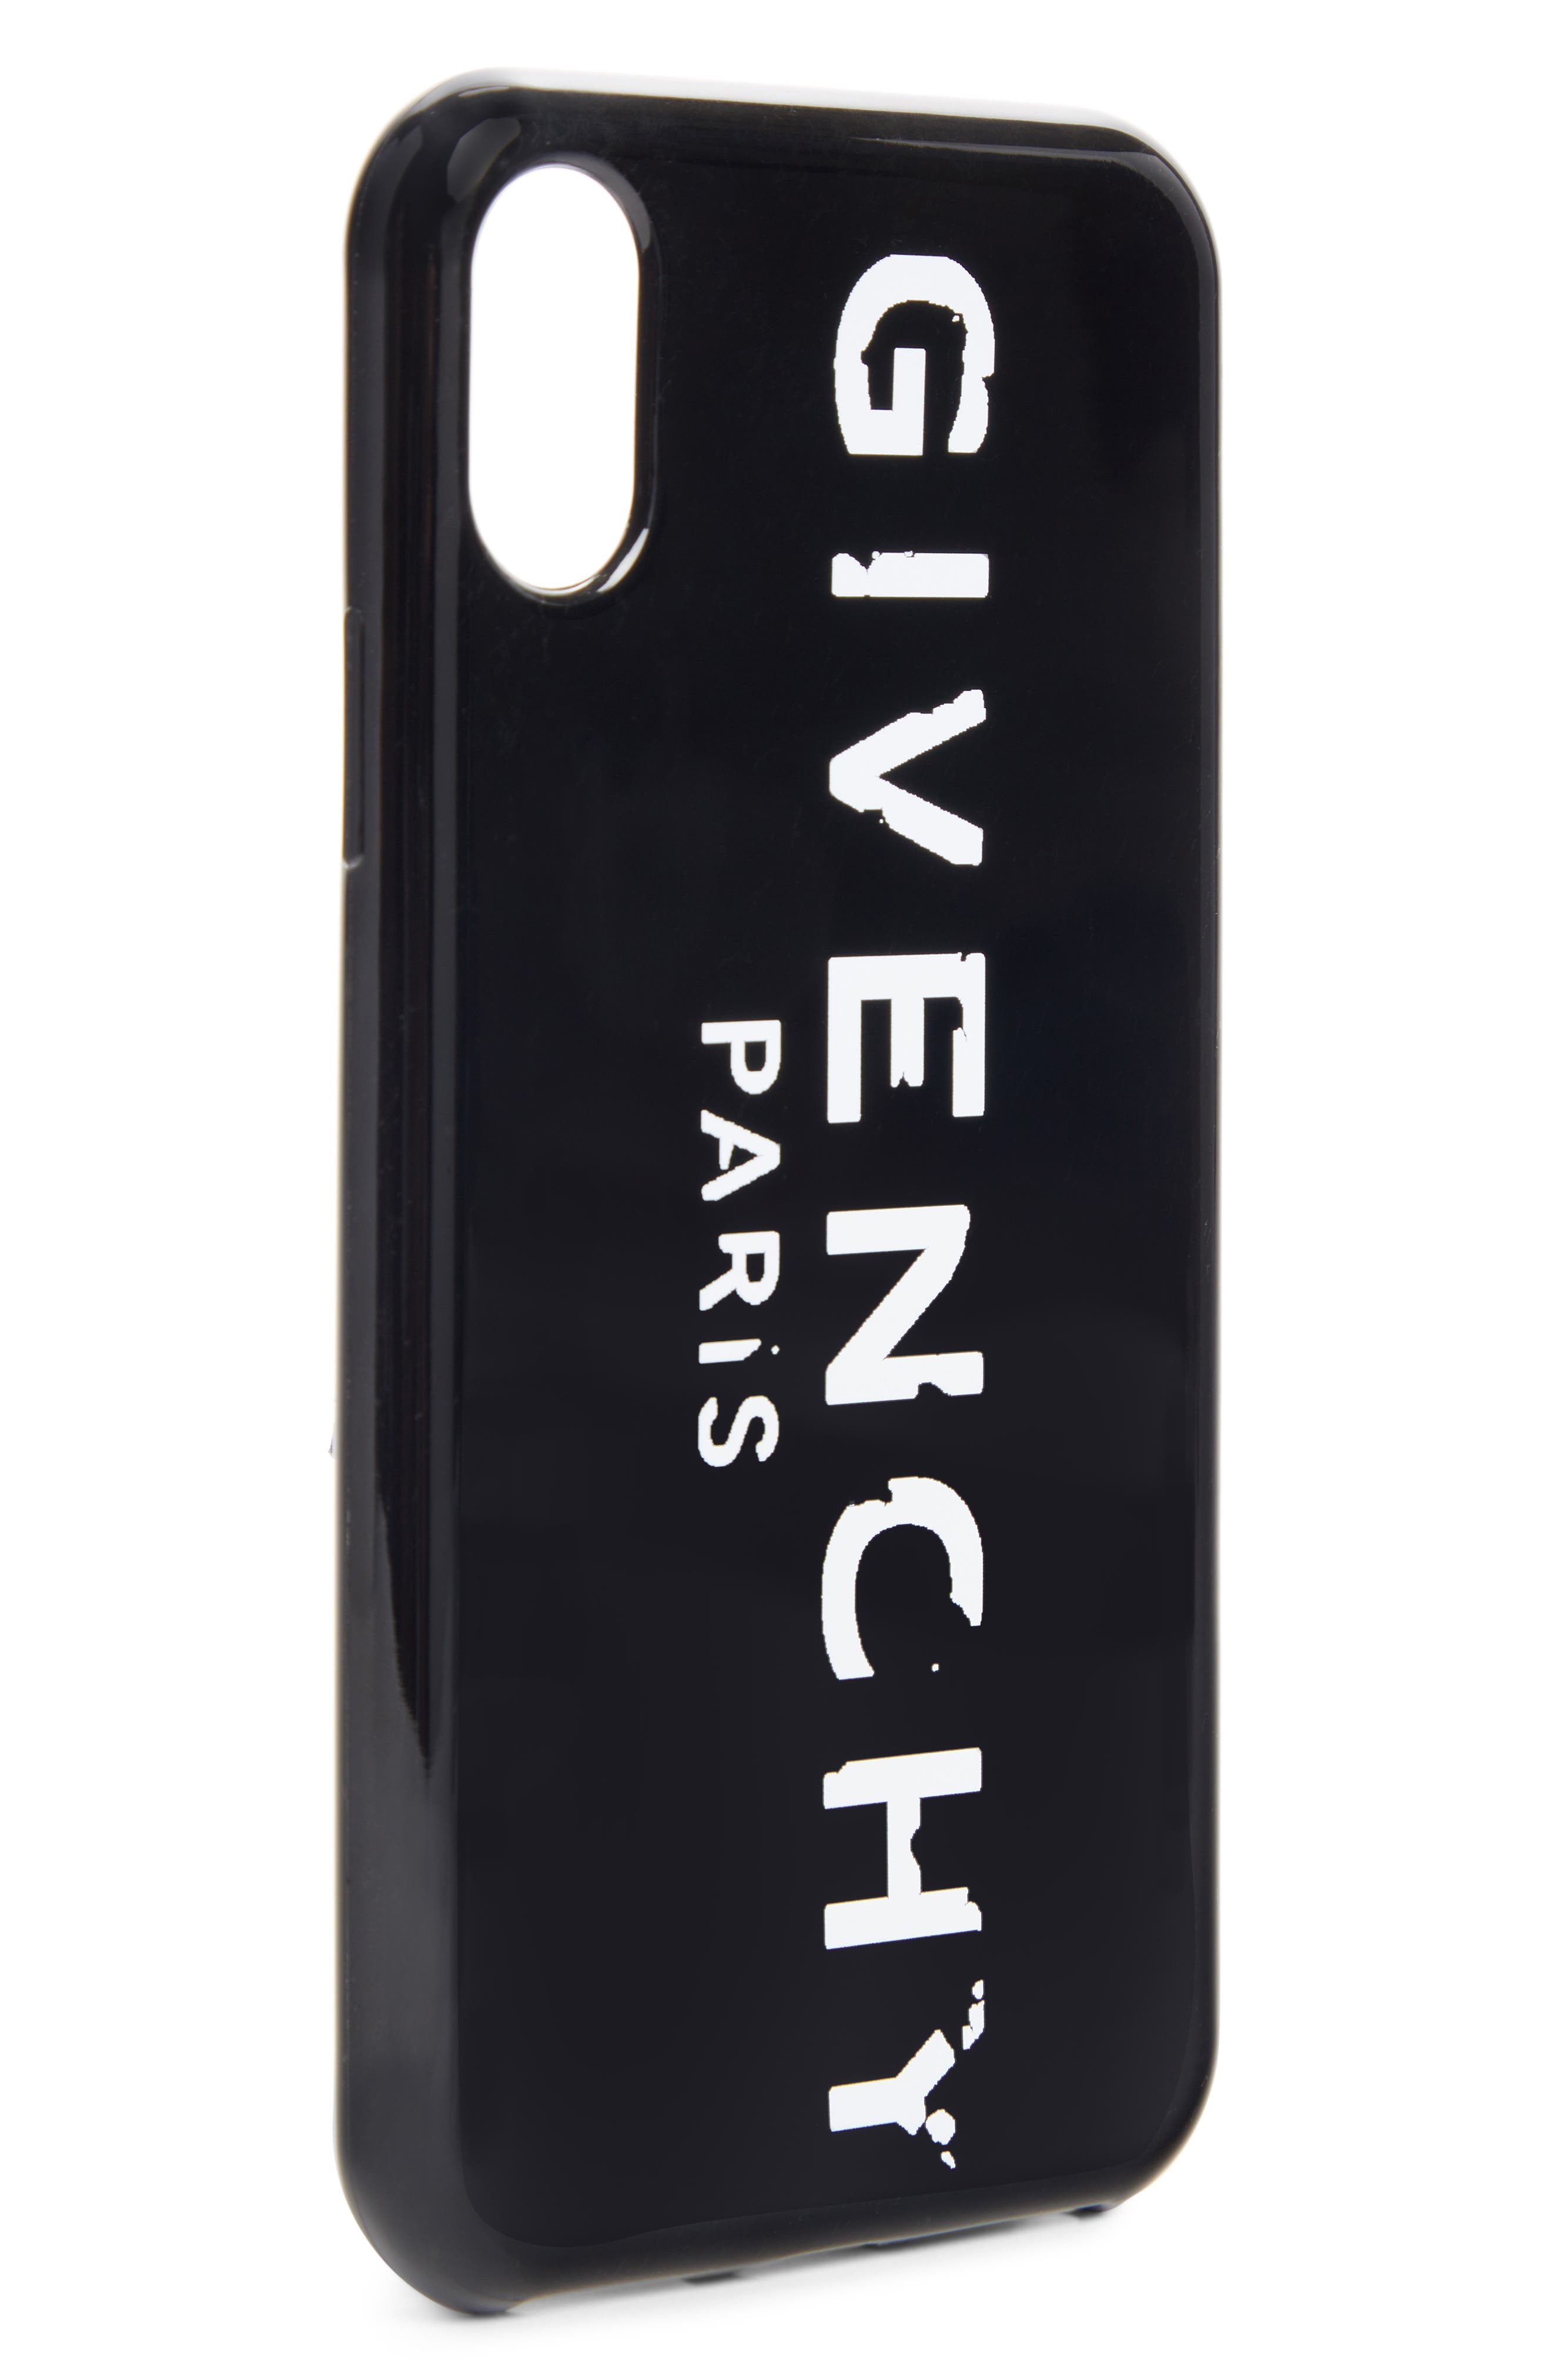 givenchy iphone